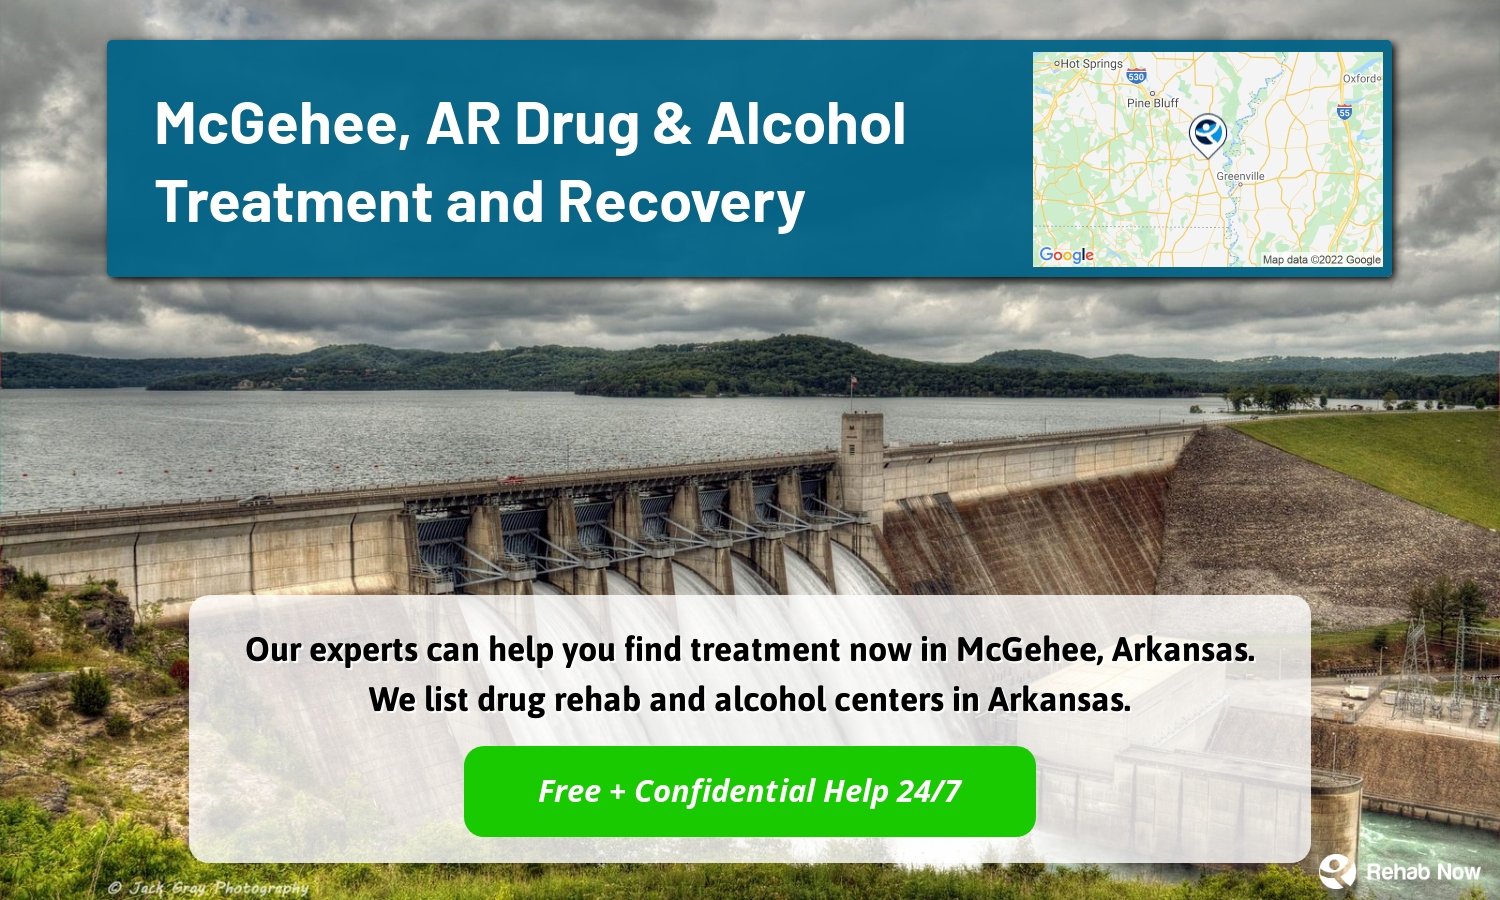 Our experts can help you find treatment now in McGehee, Arkansas. We list drug rehab and alcohol centers in Arkansas.